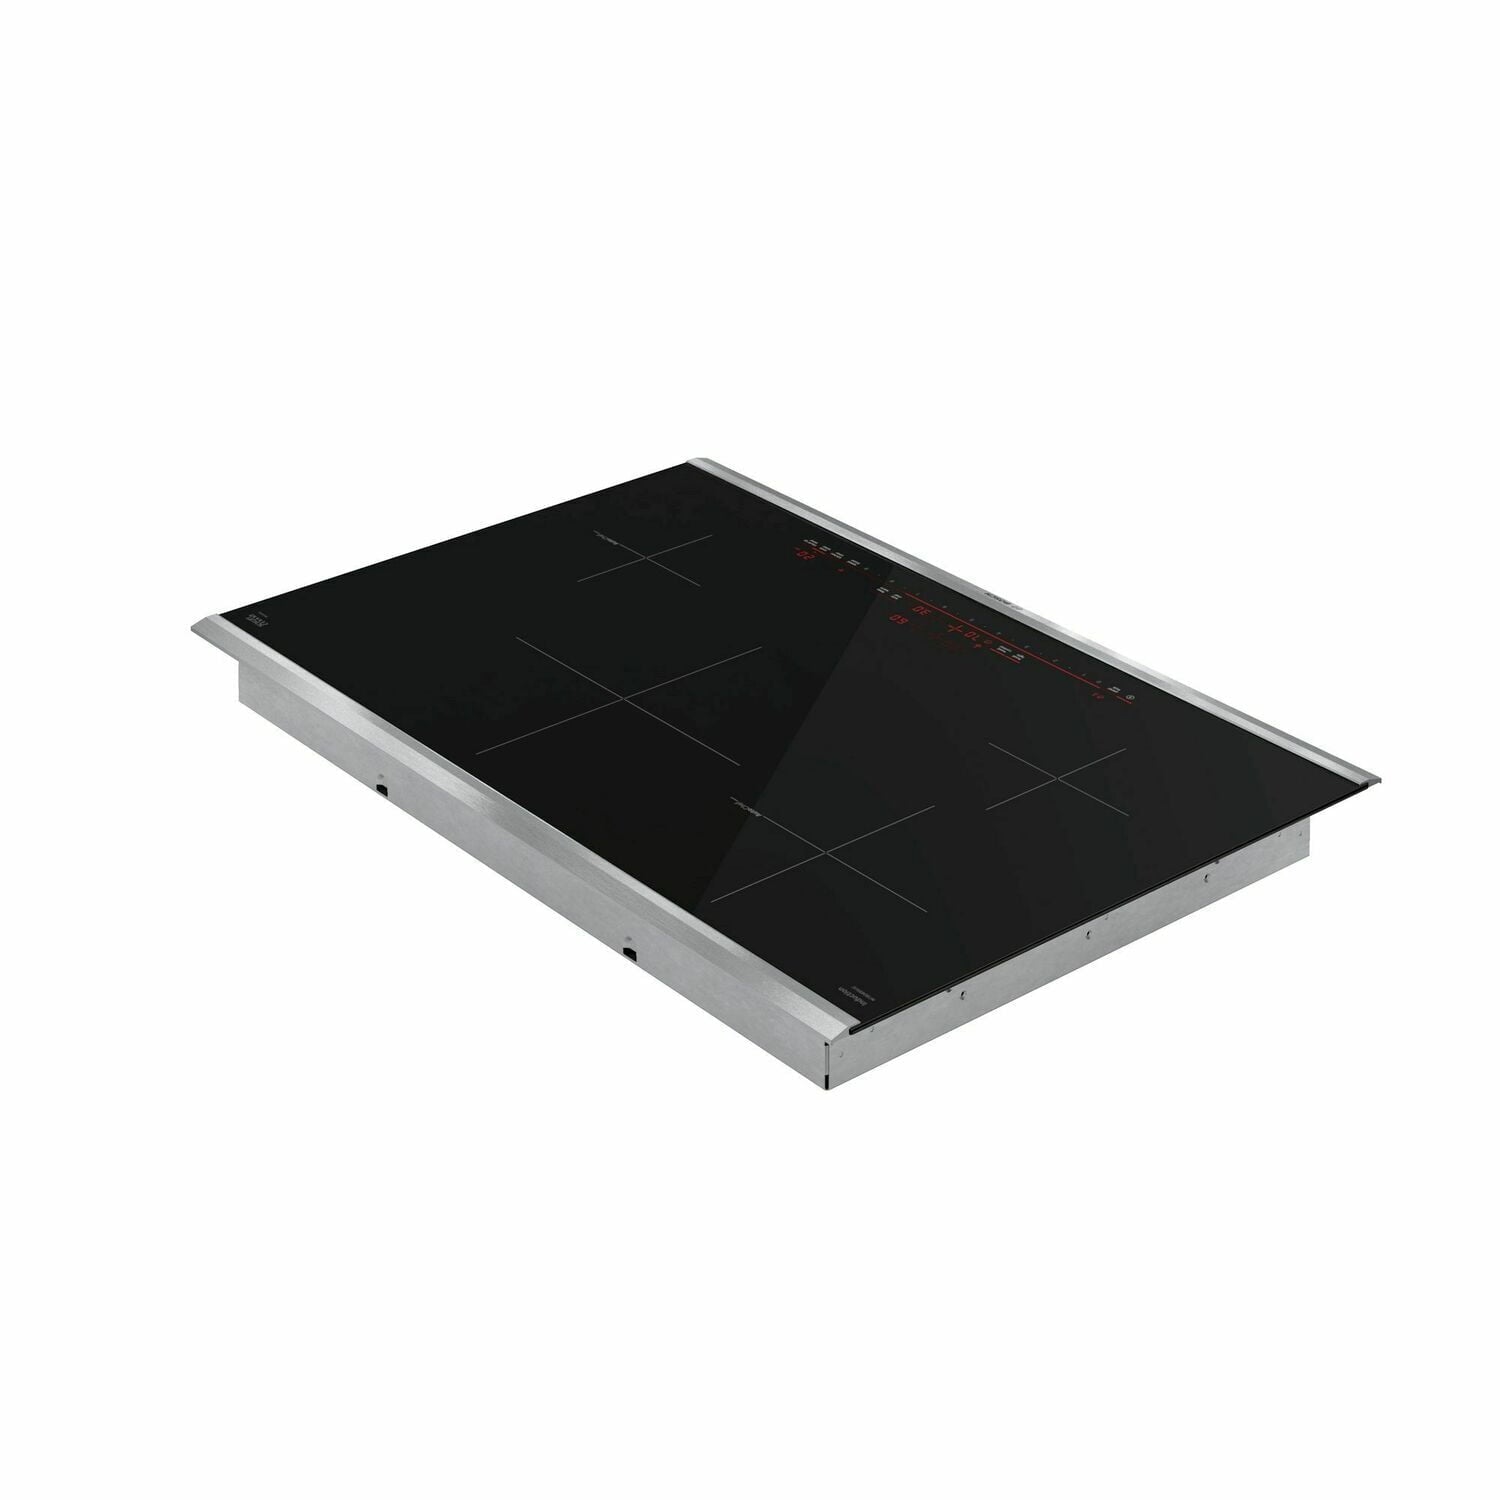 Bosch NIT8069SUC 800 Series Induction Cooktop 30'' Black Nit8069Suc